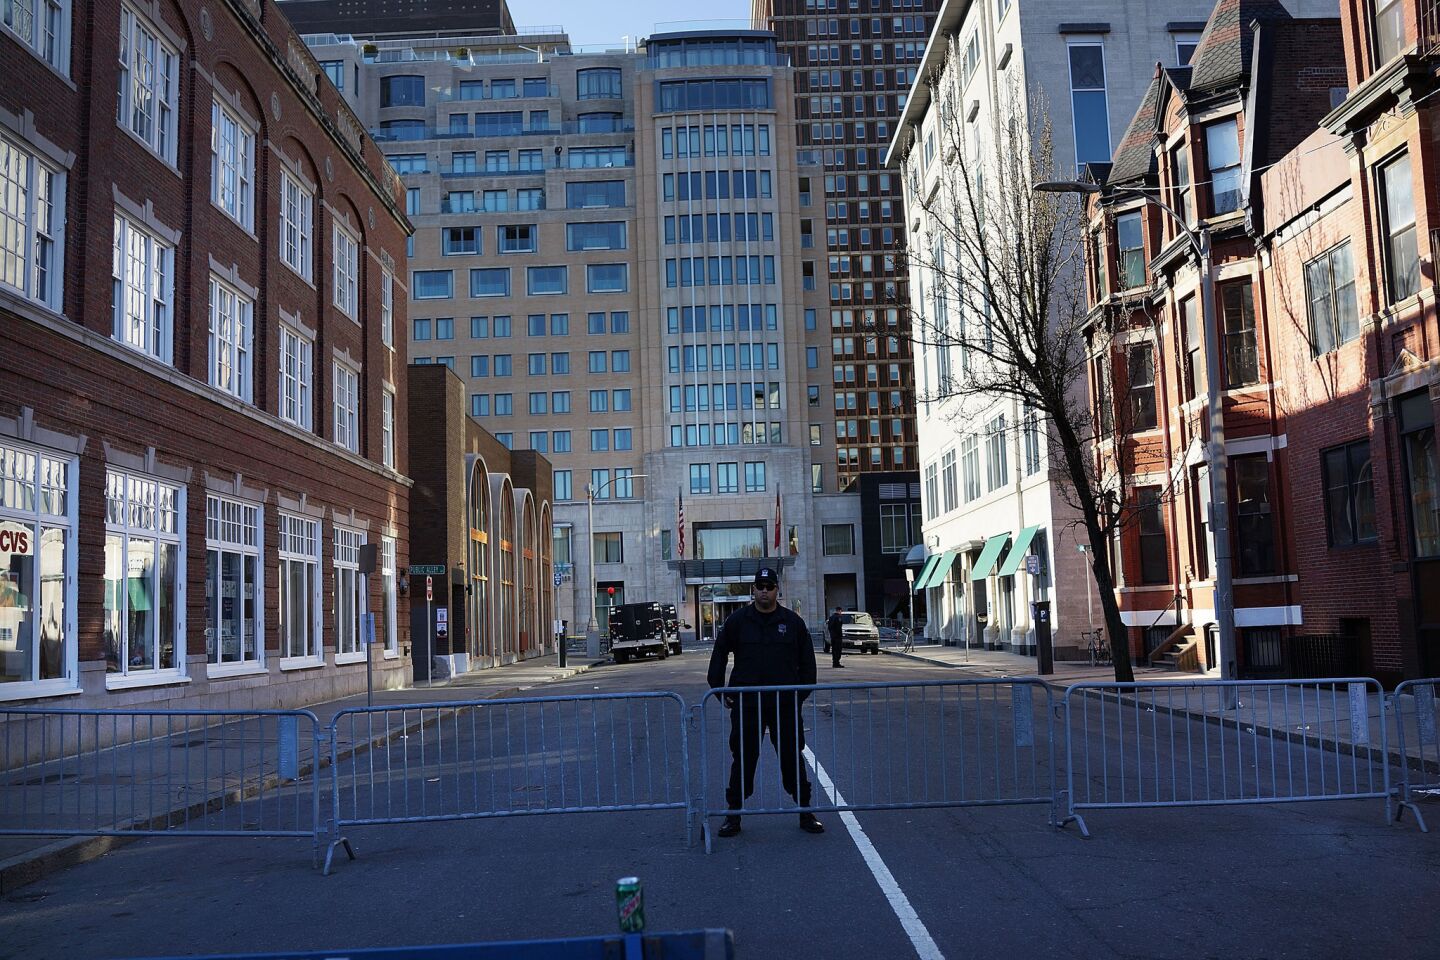 A police officer stands near the scene of Monday's twin bombings at the Boston Marathon.